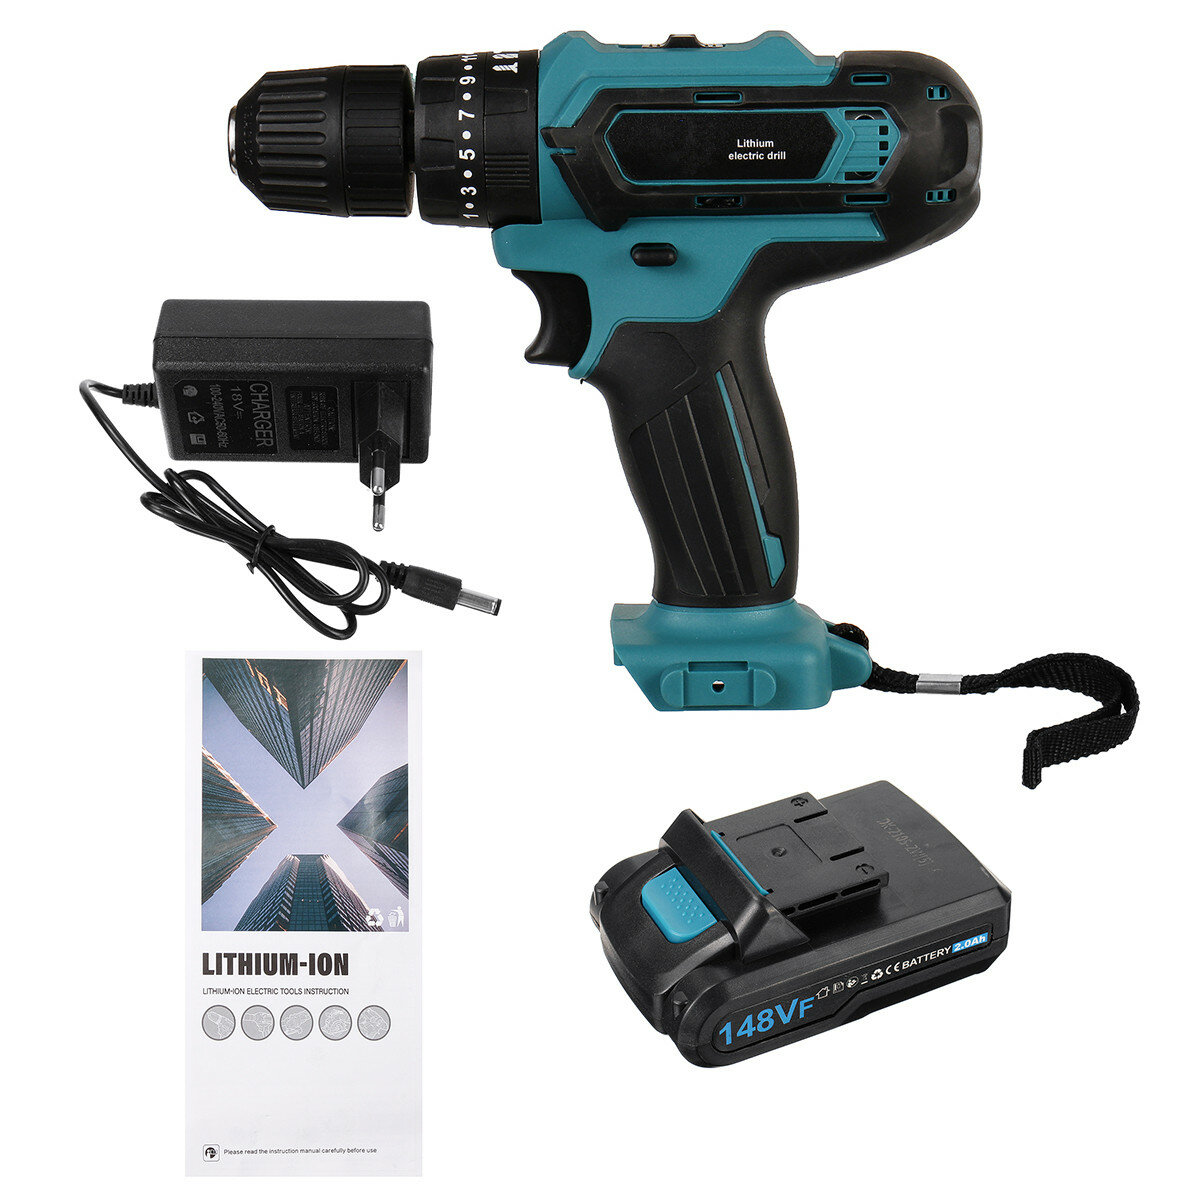 Image of 148VF 20Ah Cordless Electric Impact Drill Rechargeable Drill Screwdriver W/ 1 or 2 Li-ion Battery